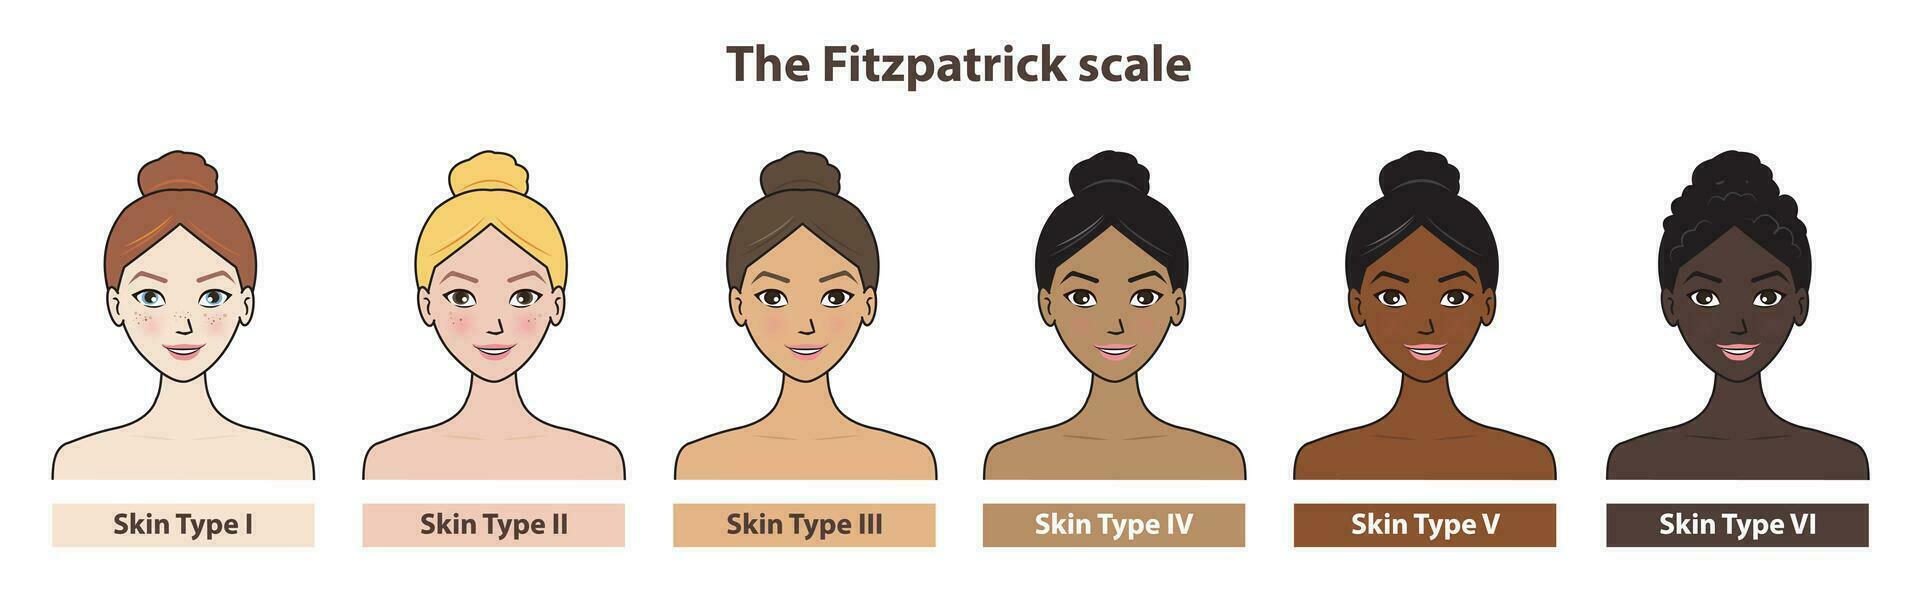 https://static.vecteezy.com/system/resources/previews/035/261/257/non_2x/fitzpatrick-skin-tone-phototype-with-cute-cartoon-character-isolated-on-white-background-diagram-of-ethnicity-skin-tone-scale-phototype-melanin-and-hair-color-melanin-the-fitzpatrick-scale-vector.jpg